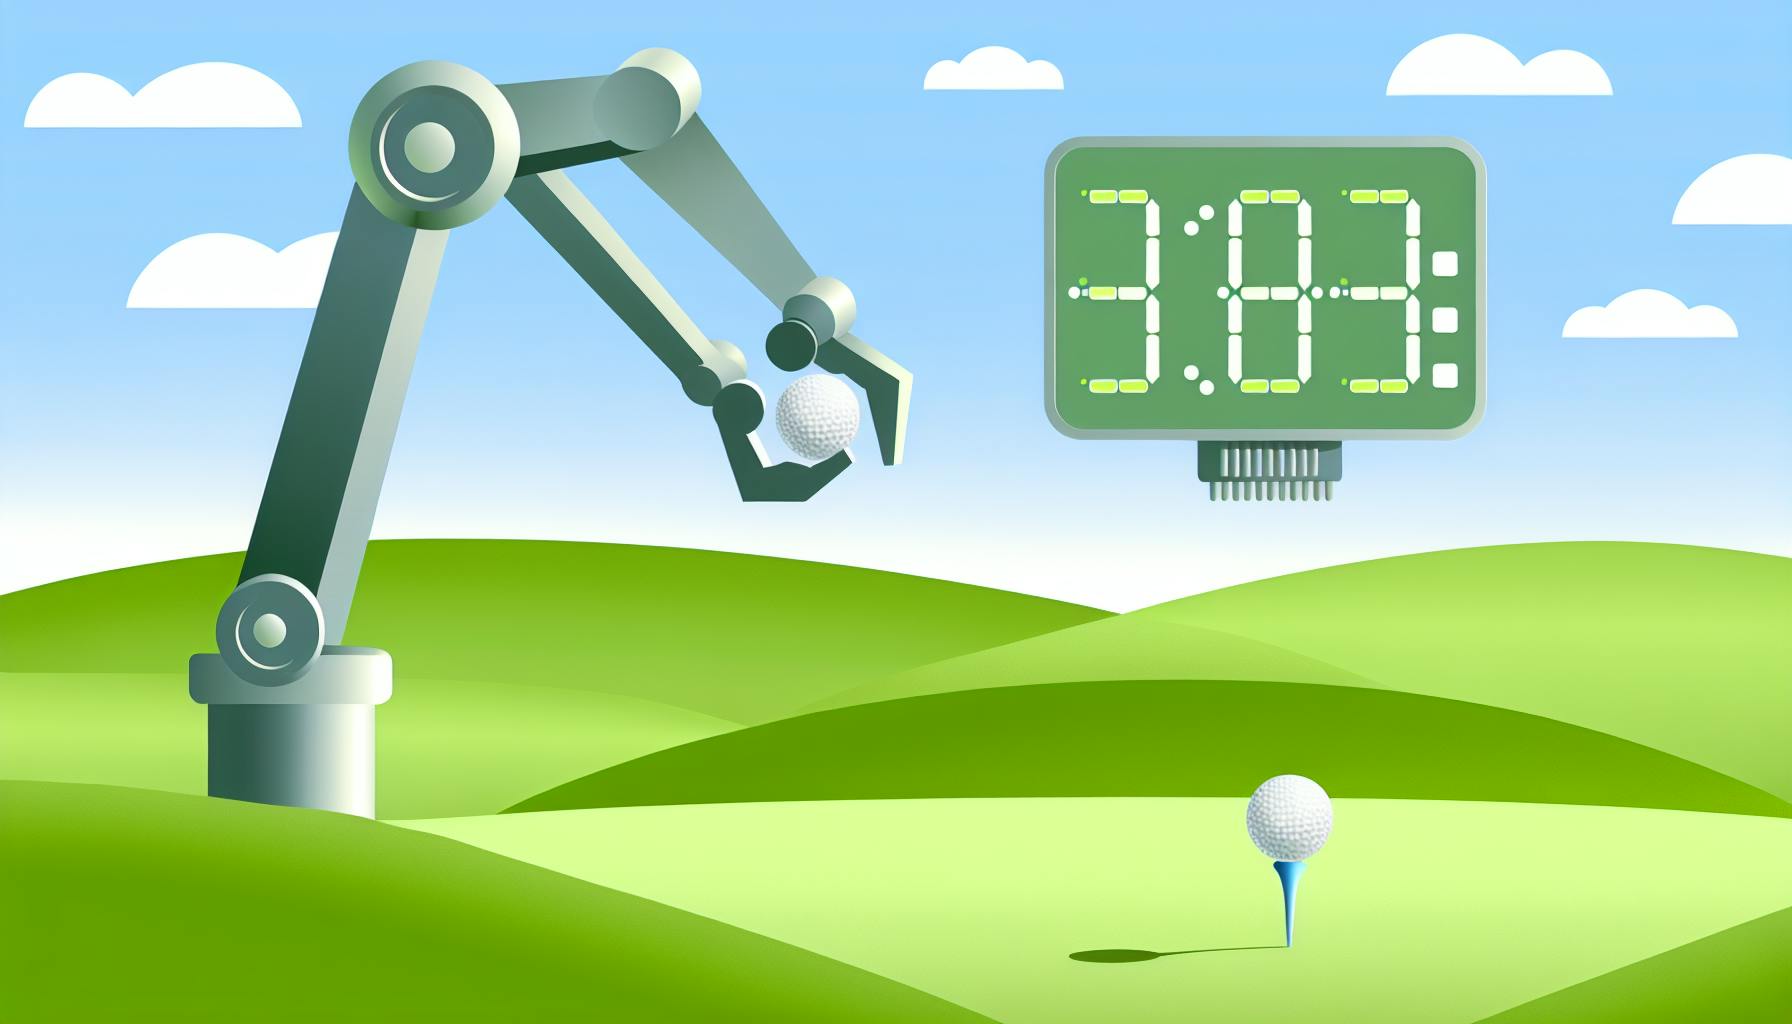 Tee Time Bot: How It Works